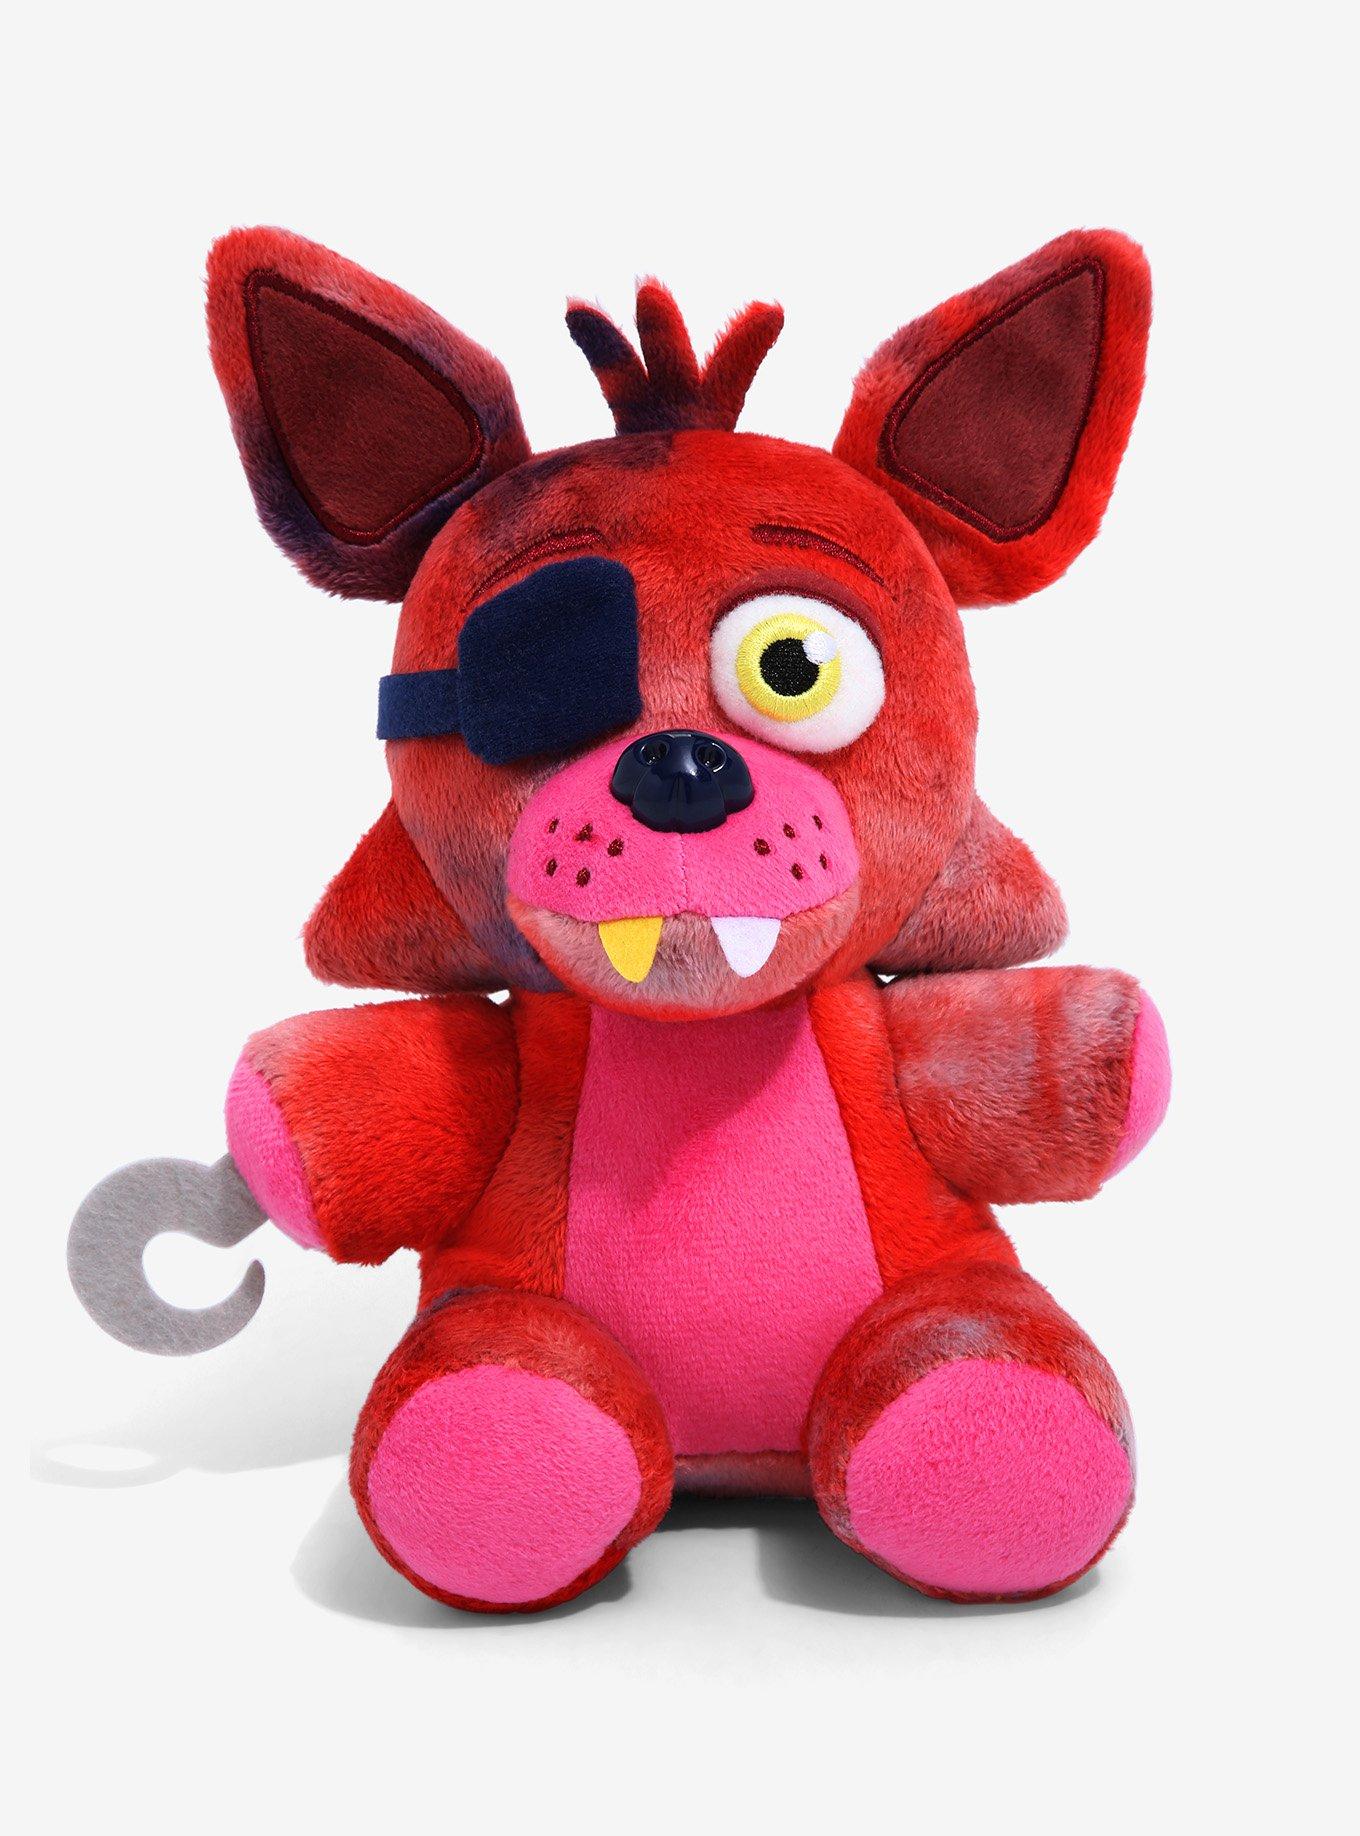  LUNK Five Nights Game Plush Doll Foxy The Pirate Plushies 7  Five Nights Soft Stuffed Toy Girls Boys Birthday Gift : Toys & Games